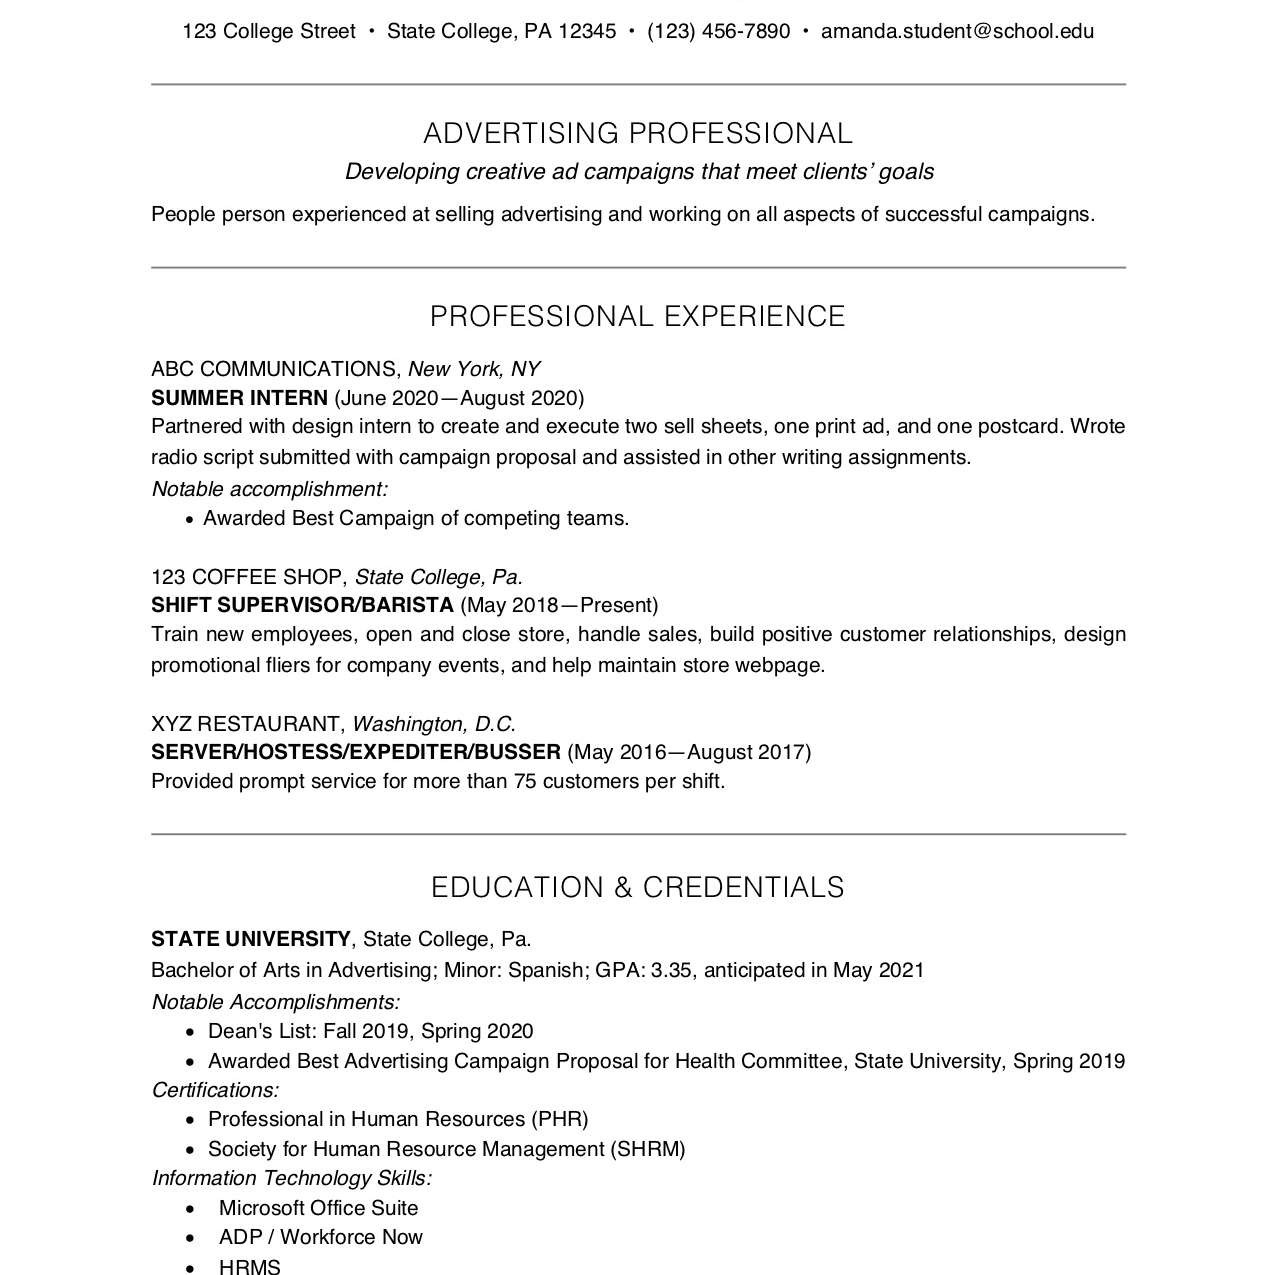 Sample Resume Profile for College Student College Student Resume Example and Writing Tips